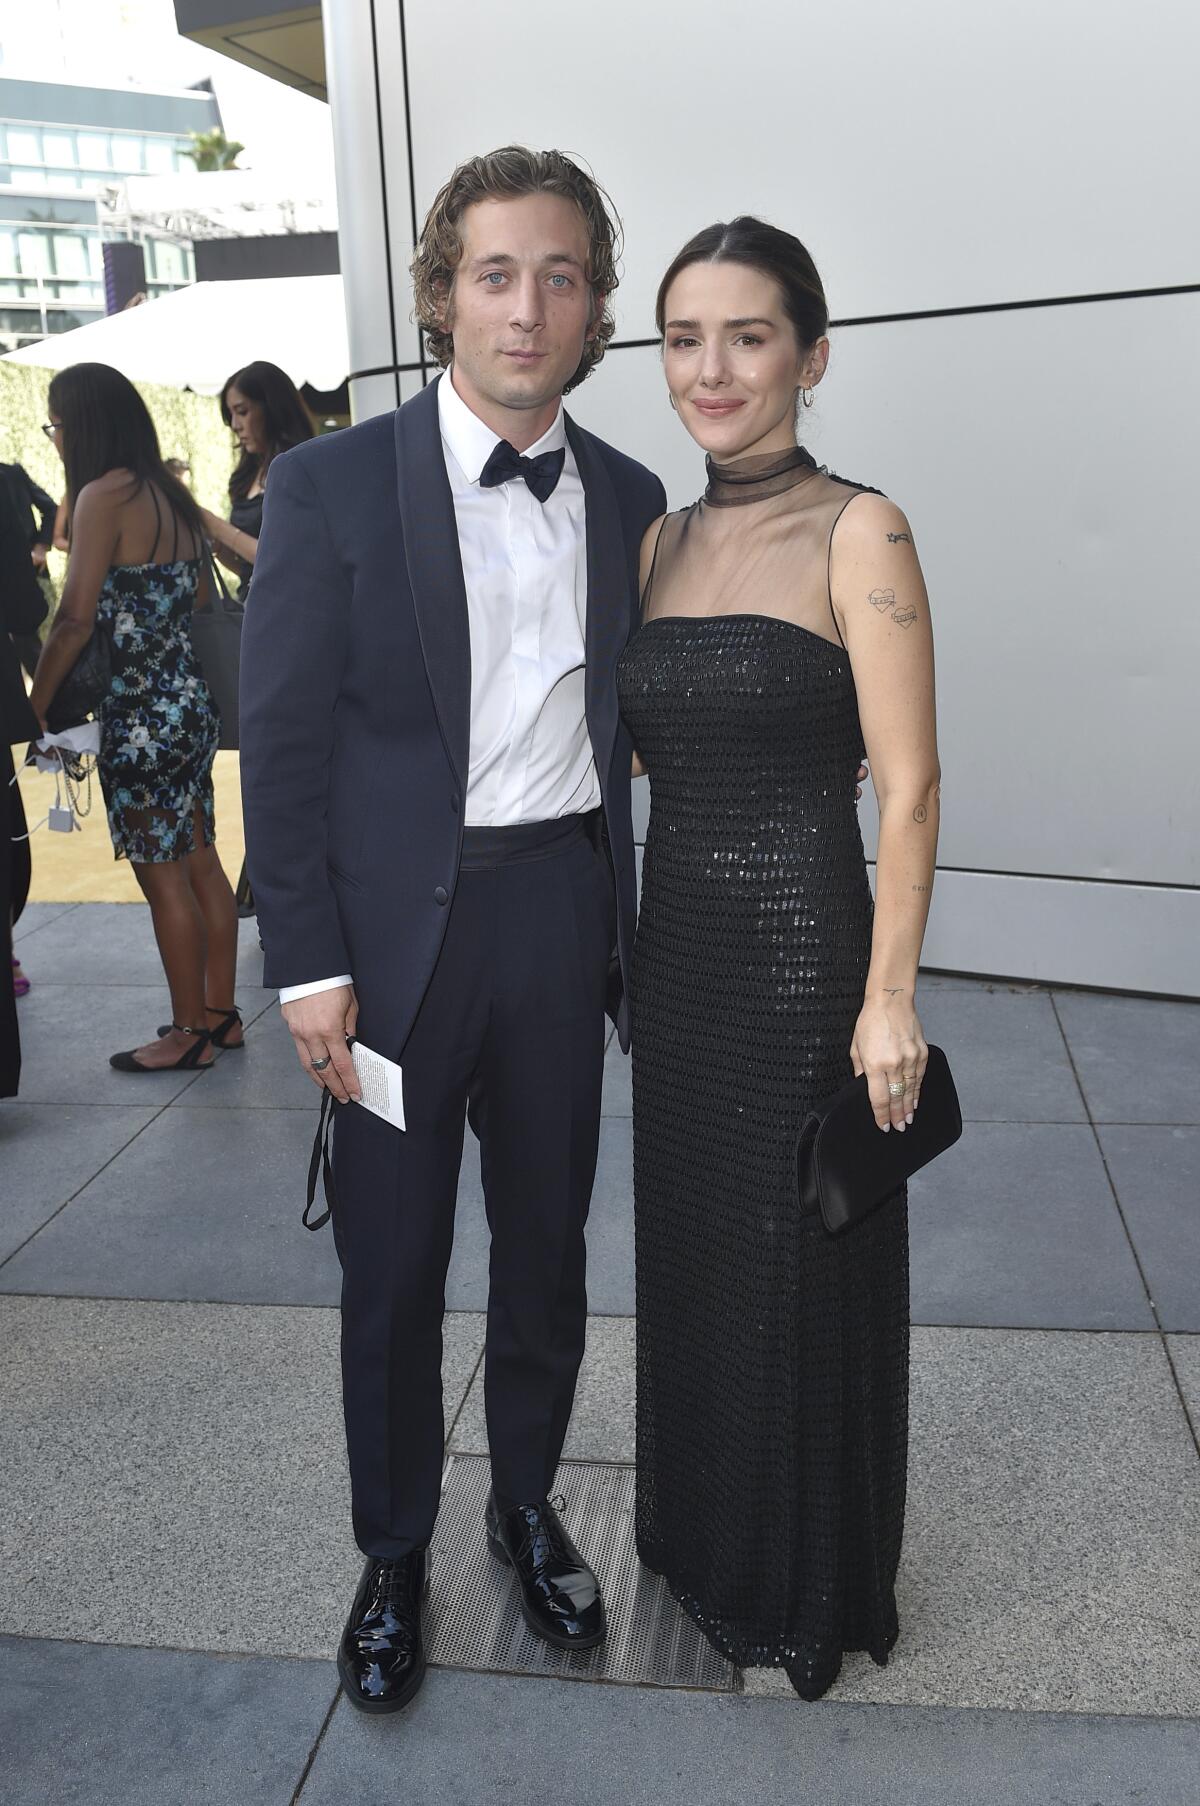 Jeremy Allen White and Addison Timlin arrive at the 2022 Emmys